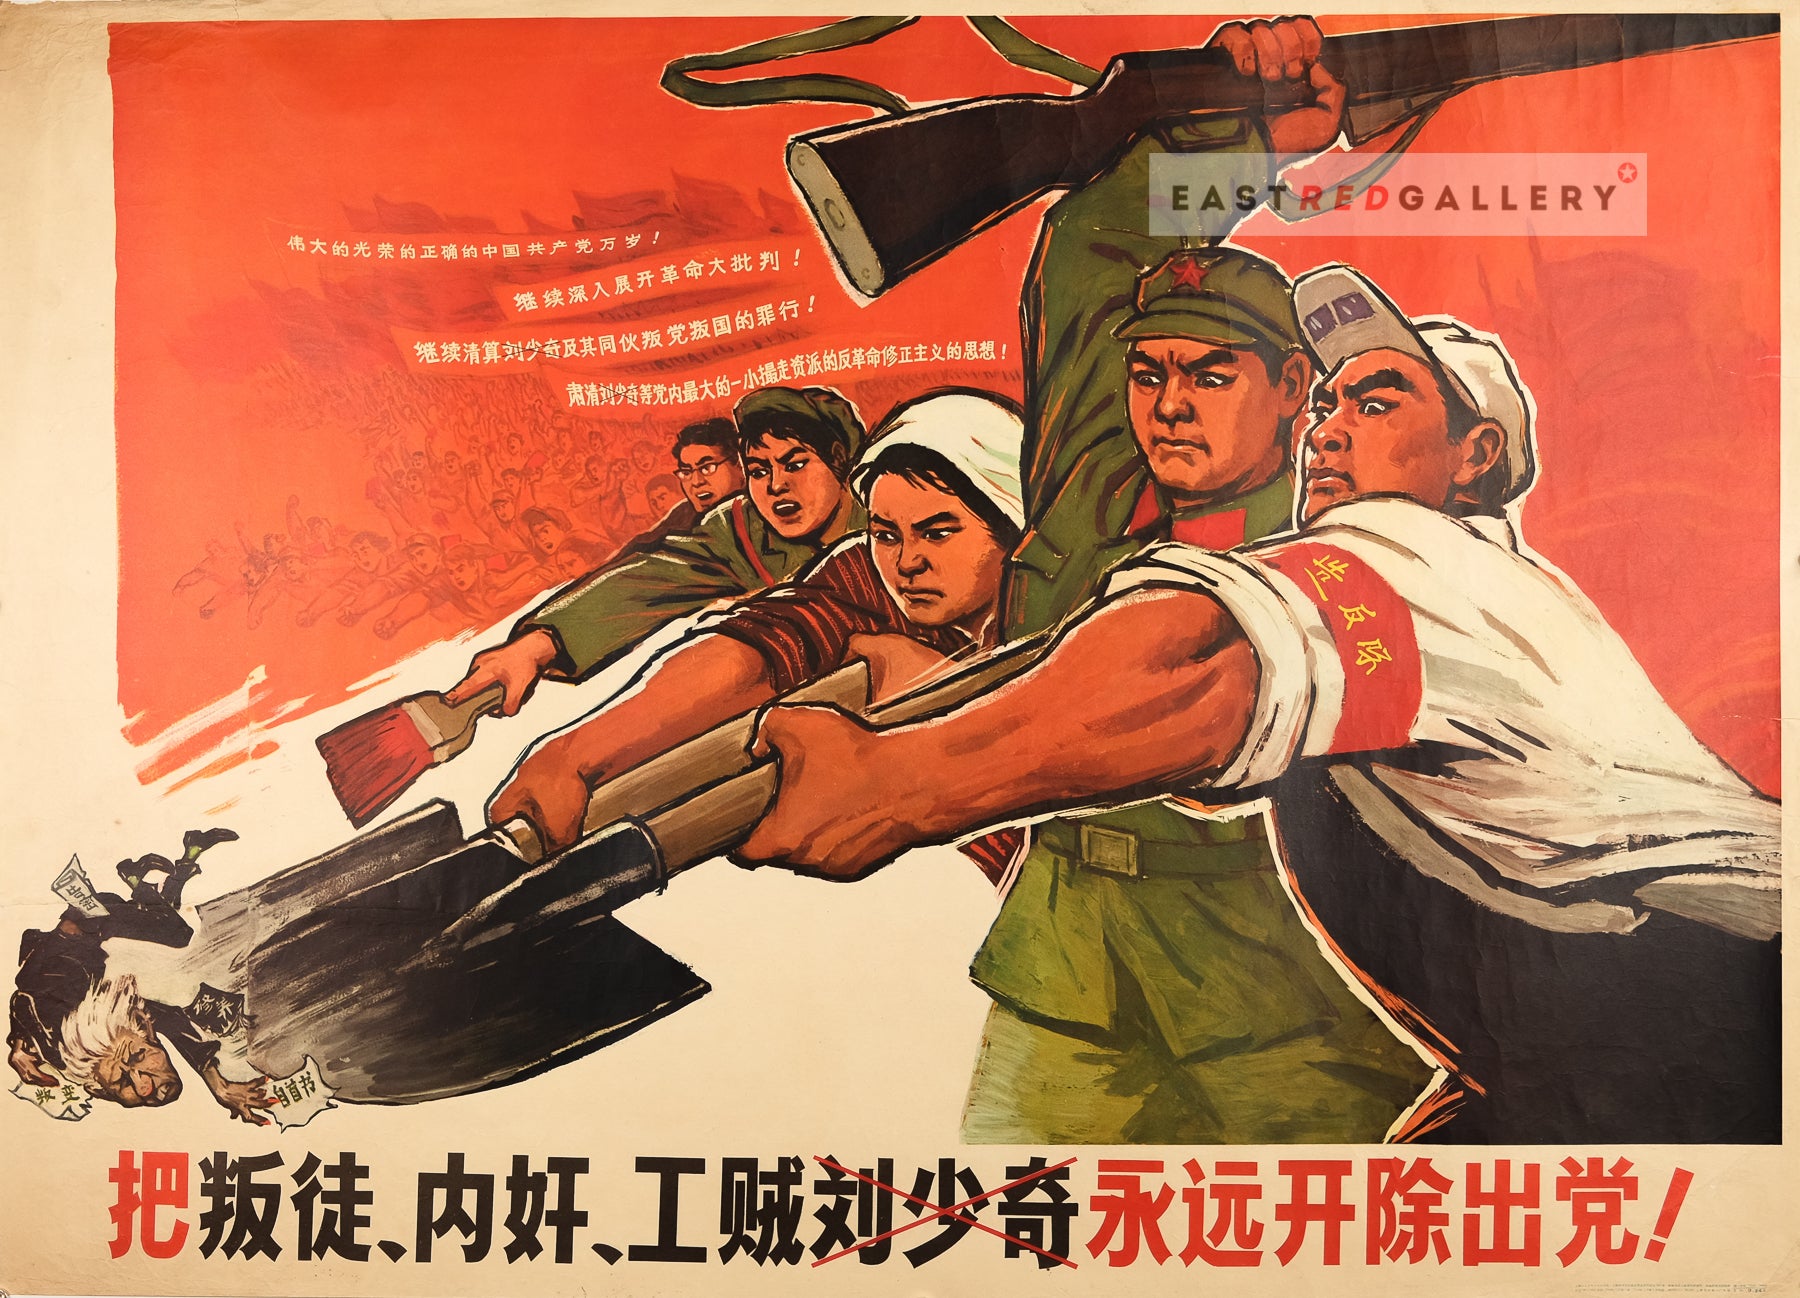 image of 1968 Chinese propaganda poster Expel the traitor, collaborator and thief Liu Shaoqi from the Party forever